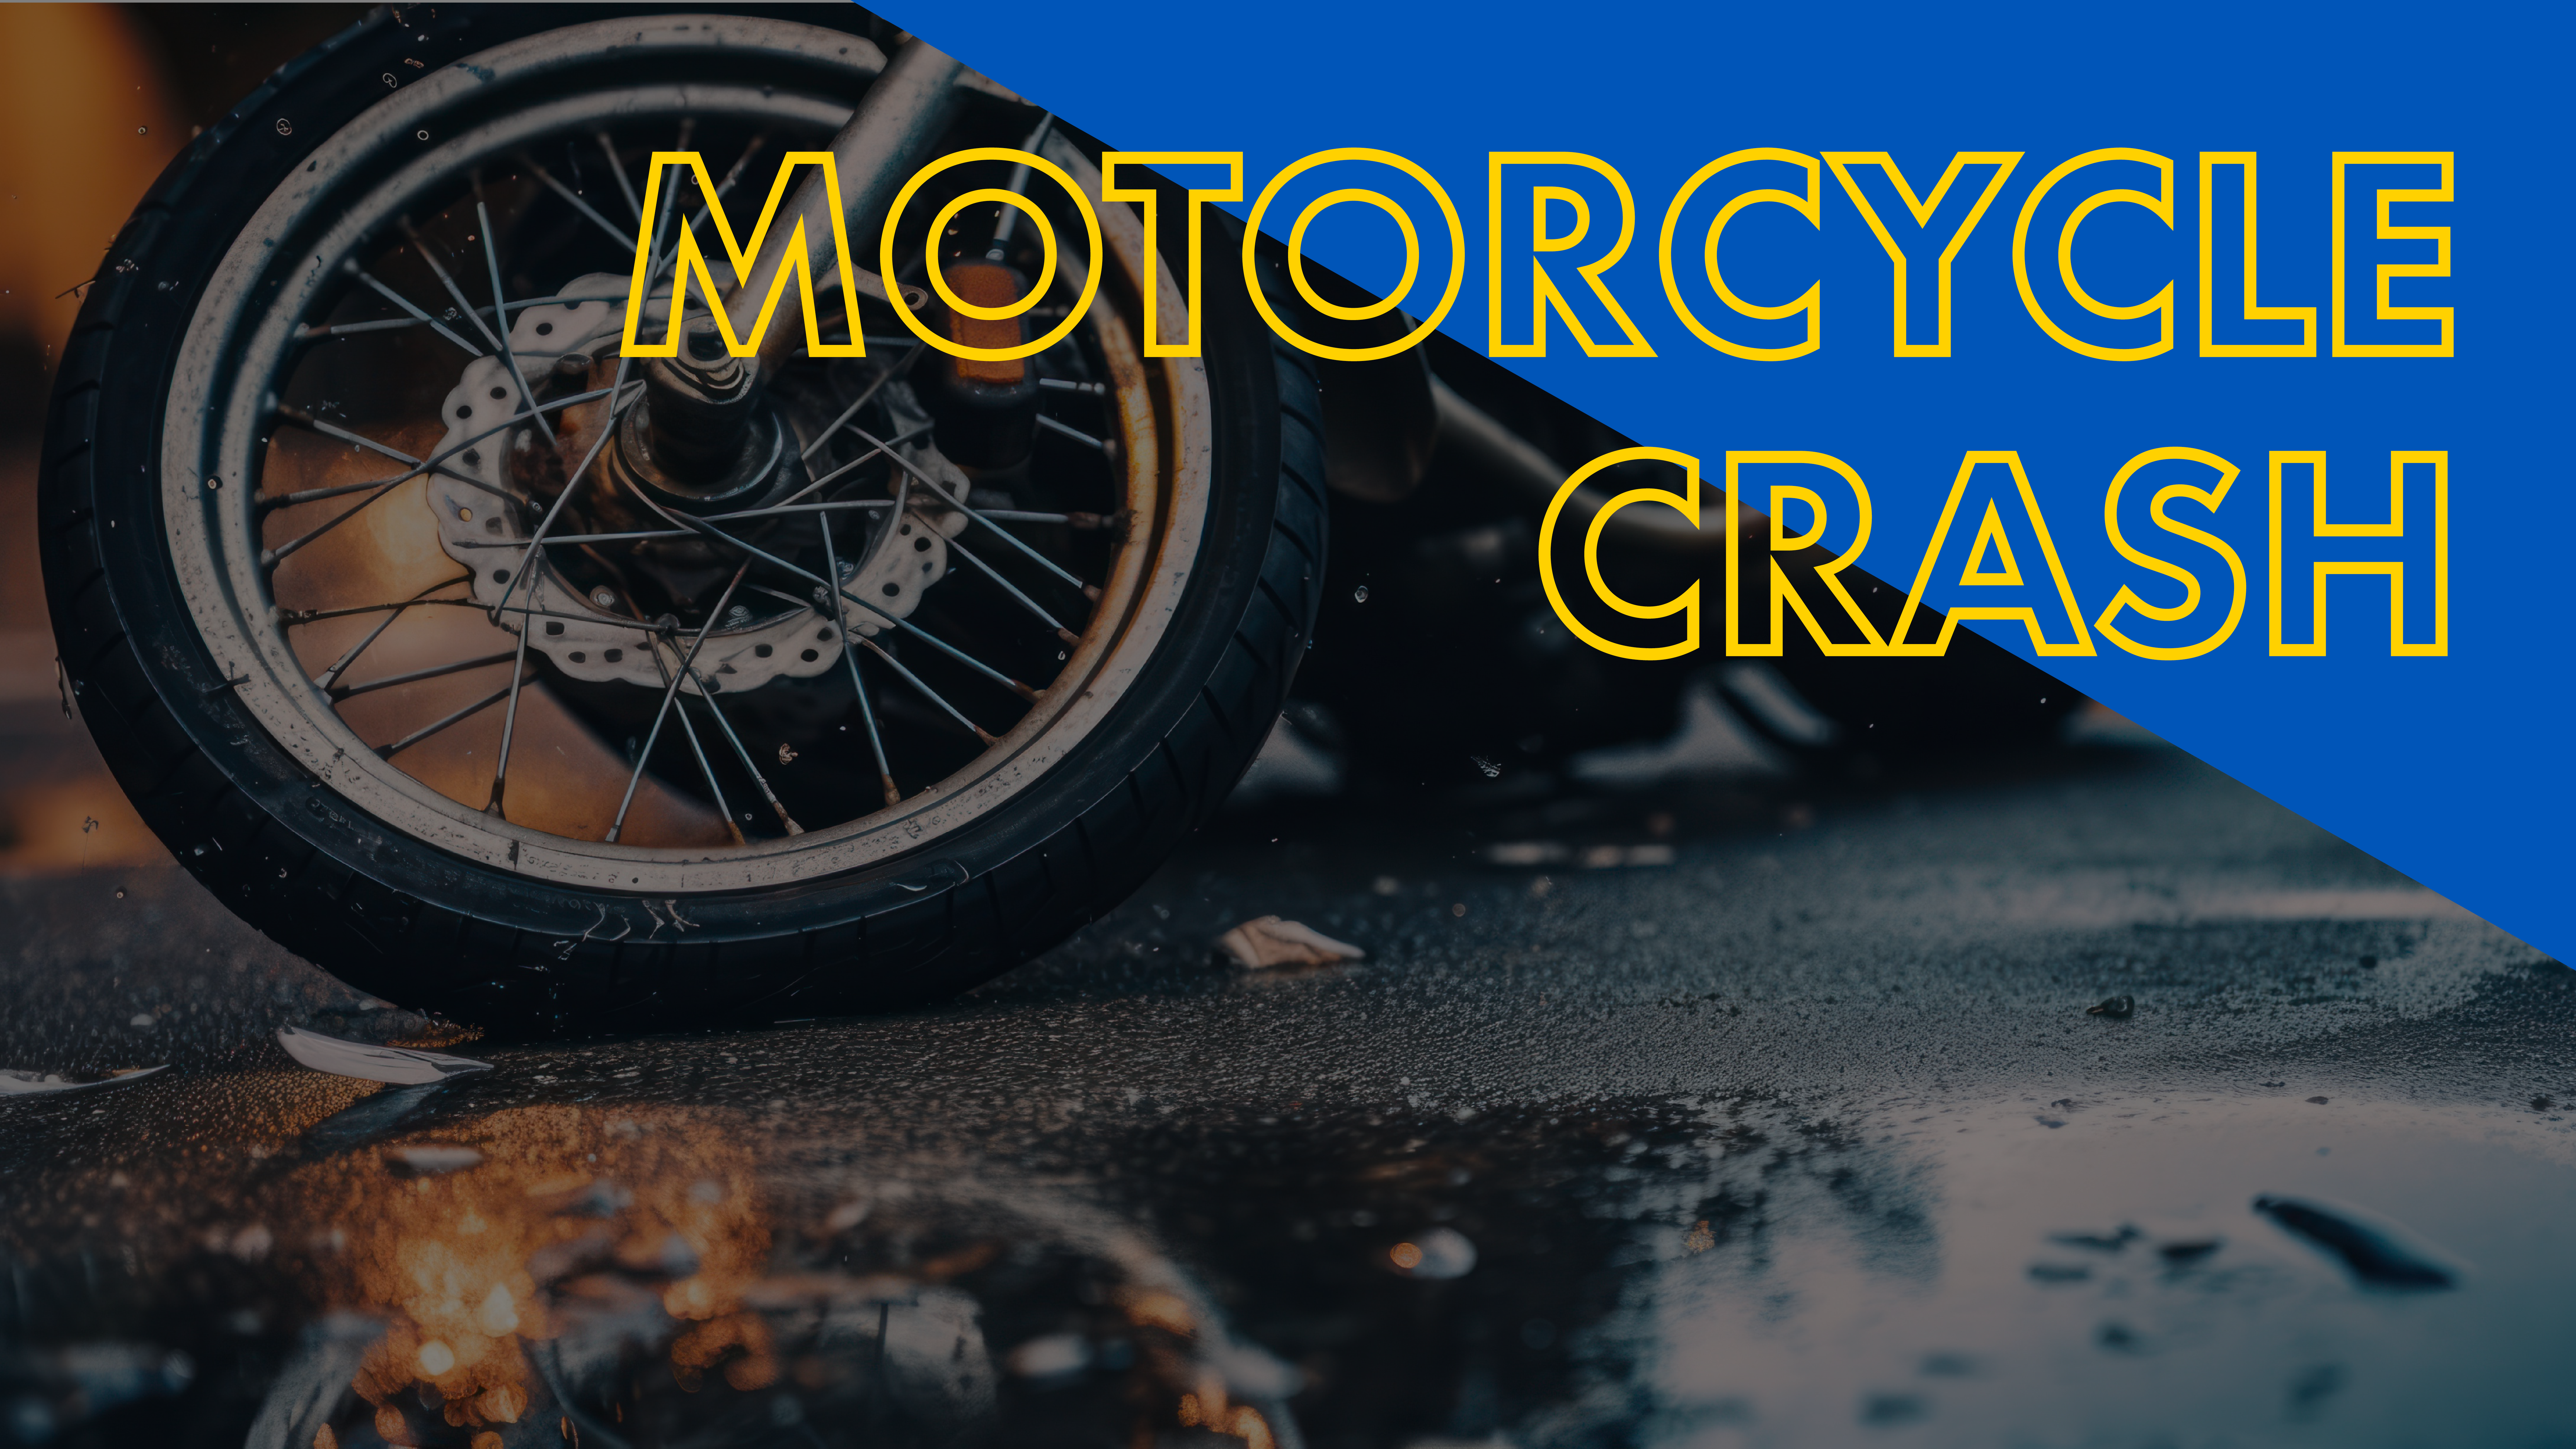 Motorcyclist in hospital after speeding and crashing at roundabout, deputies say